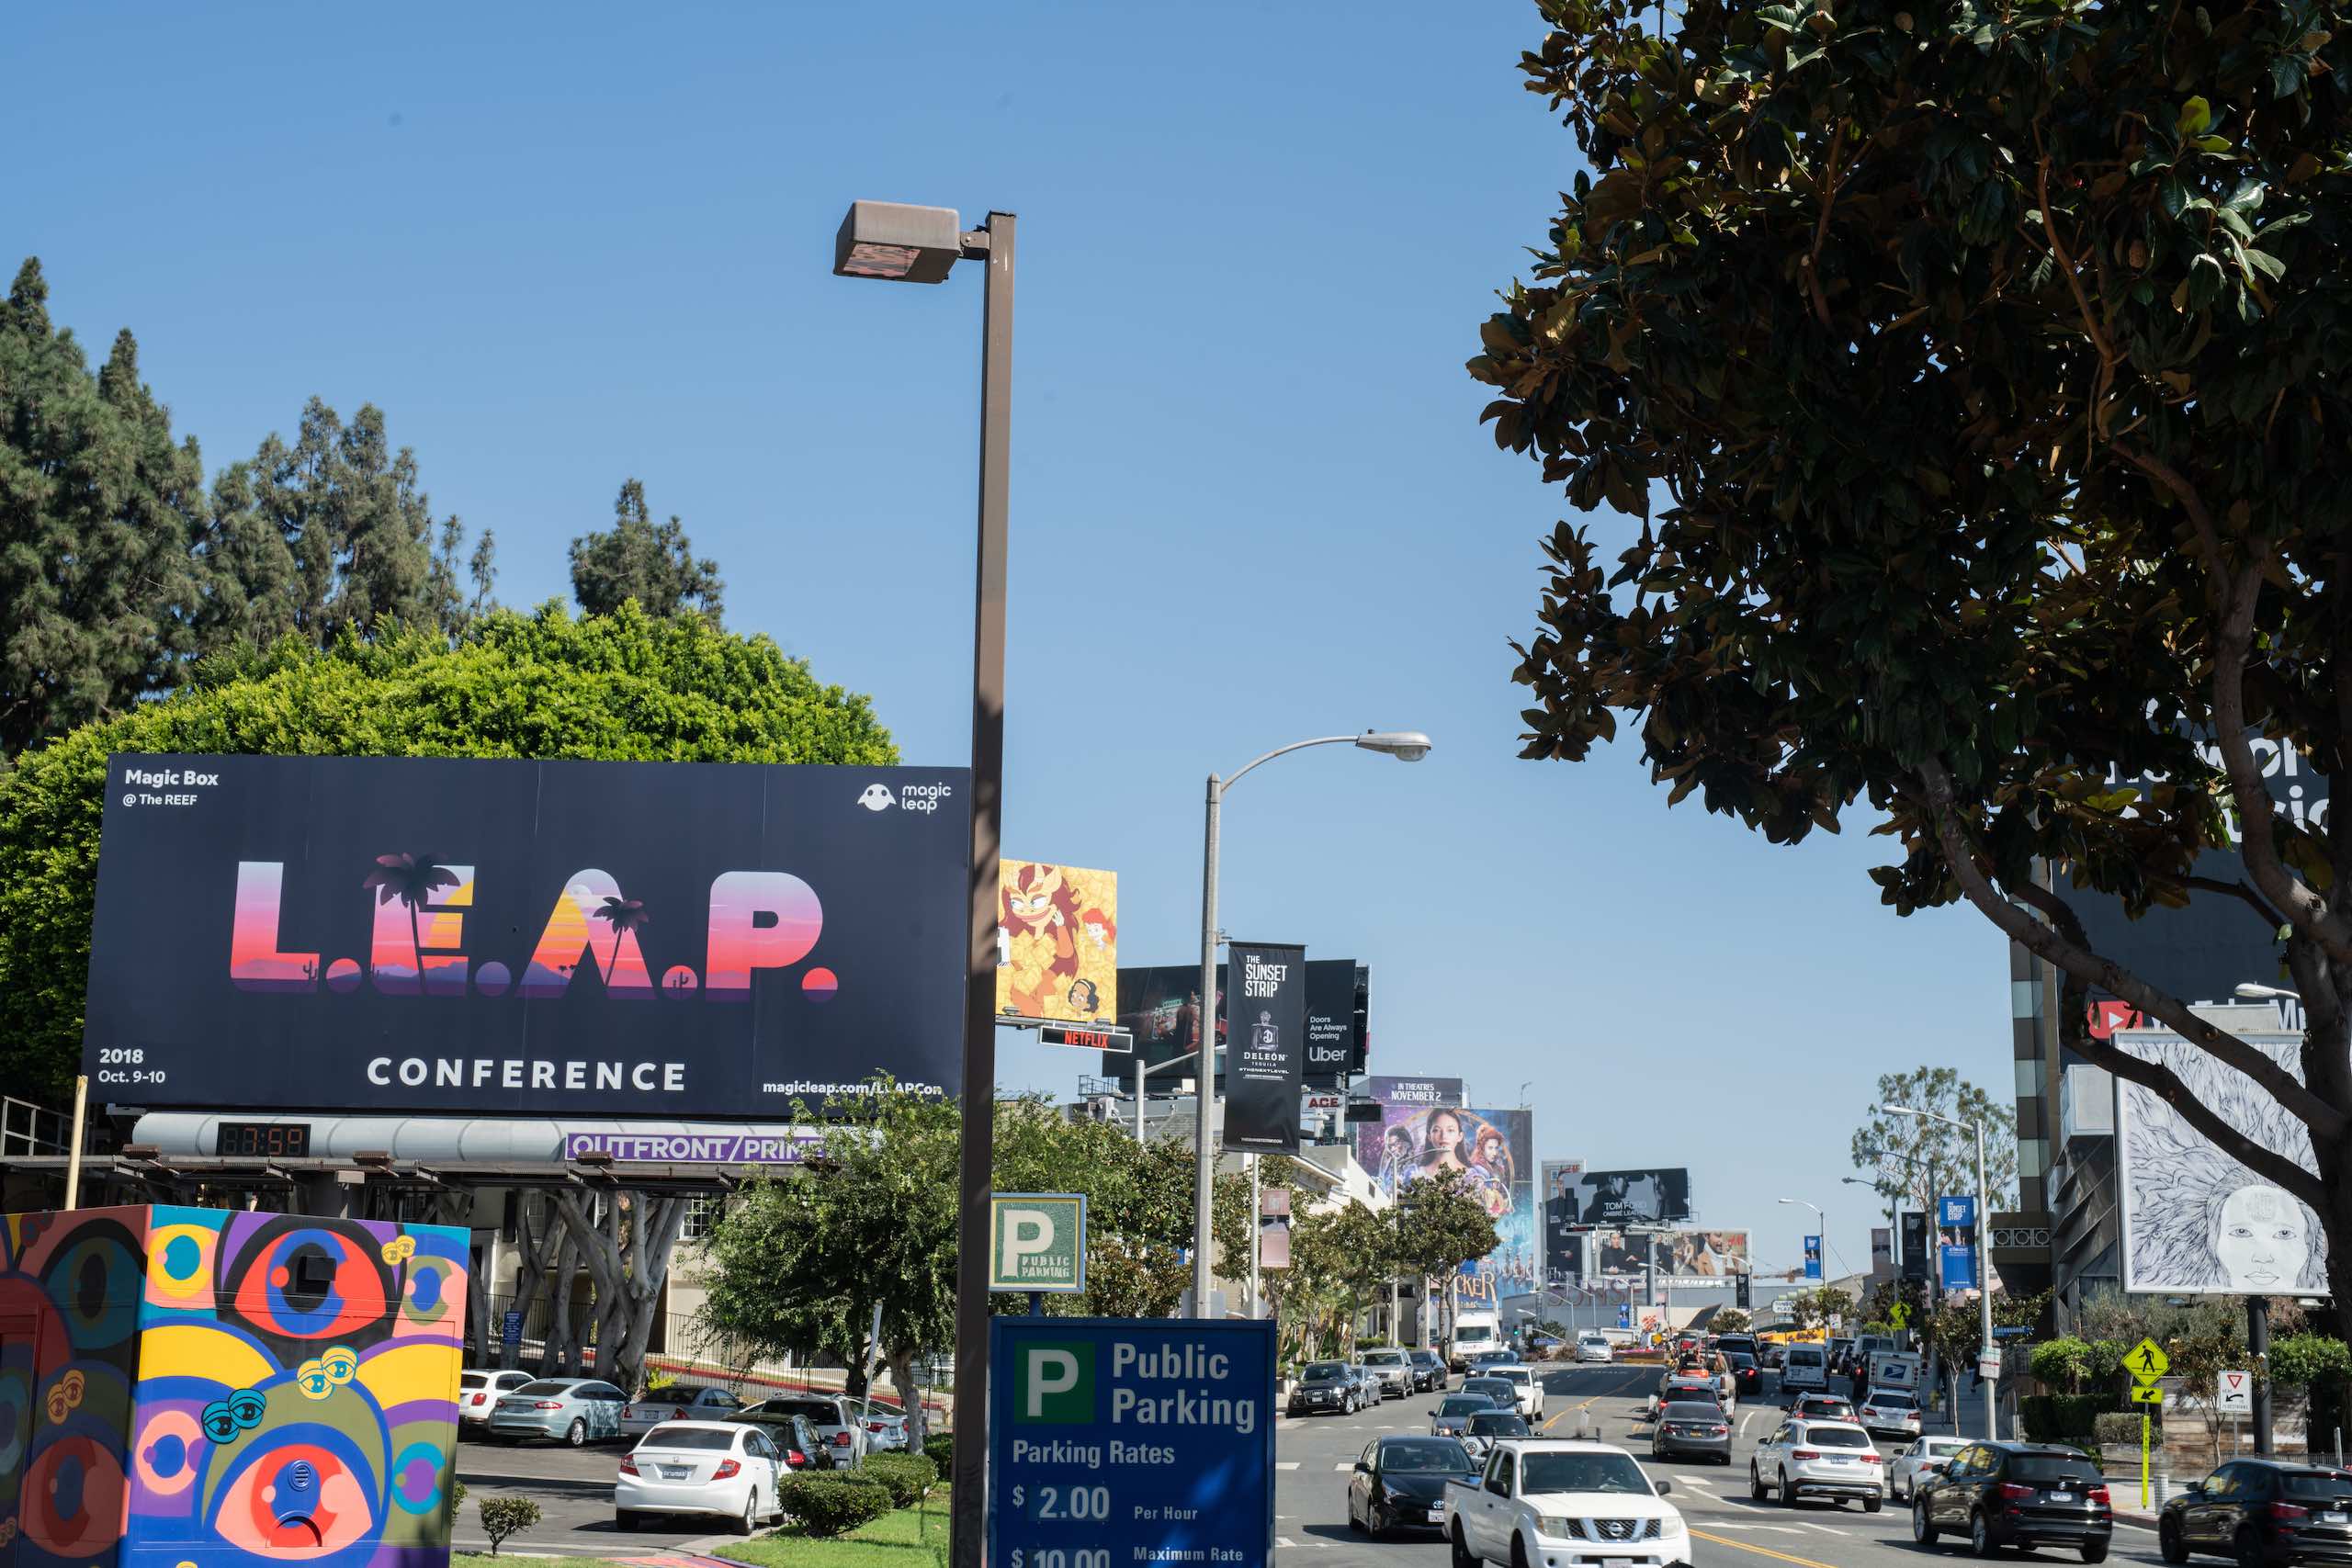 LEAP Conference billboard on display by a parking lot in city near road with cars parked and driving by